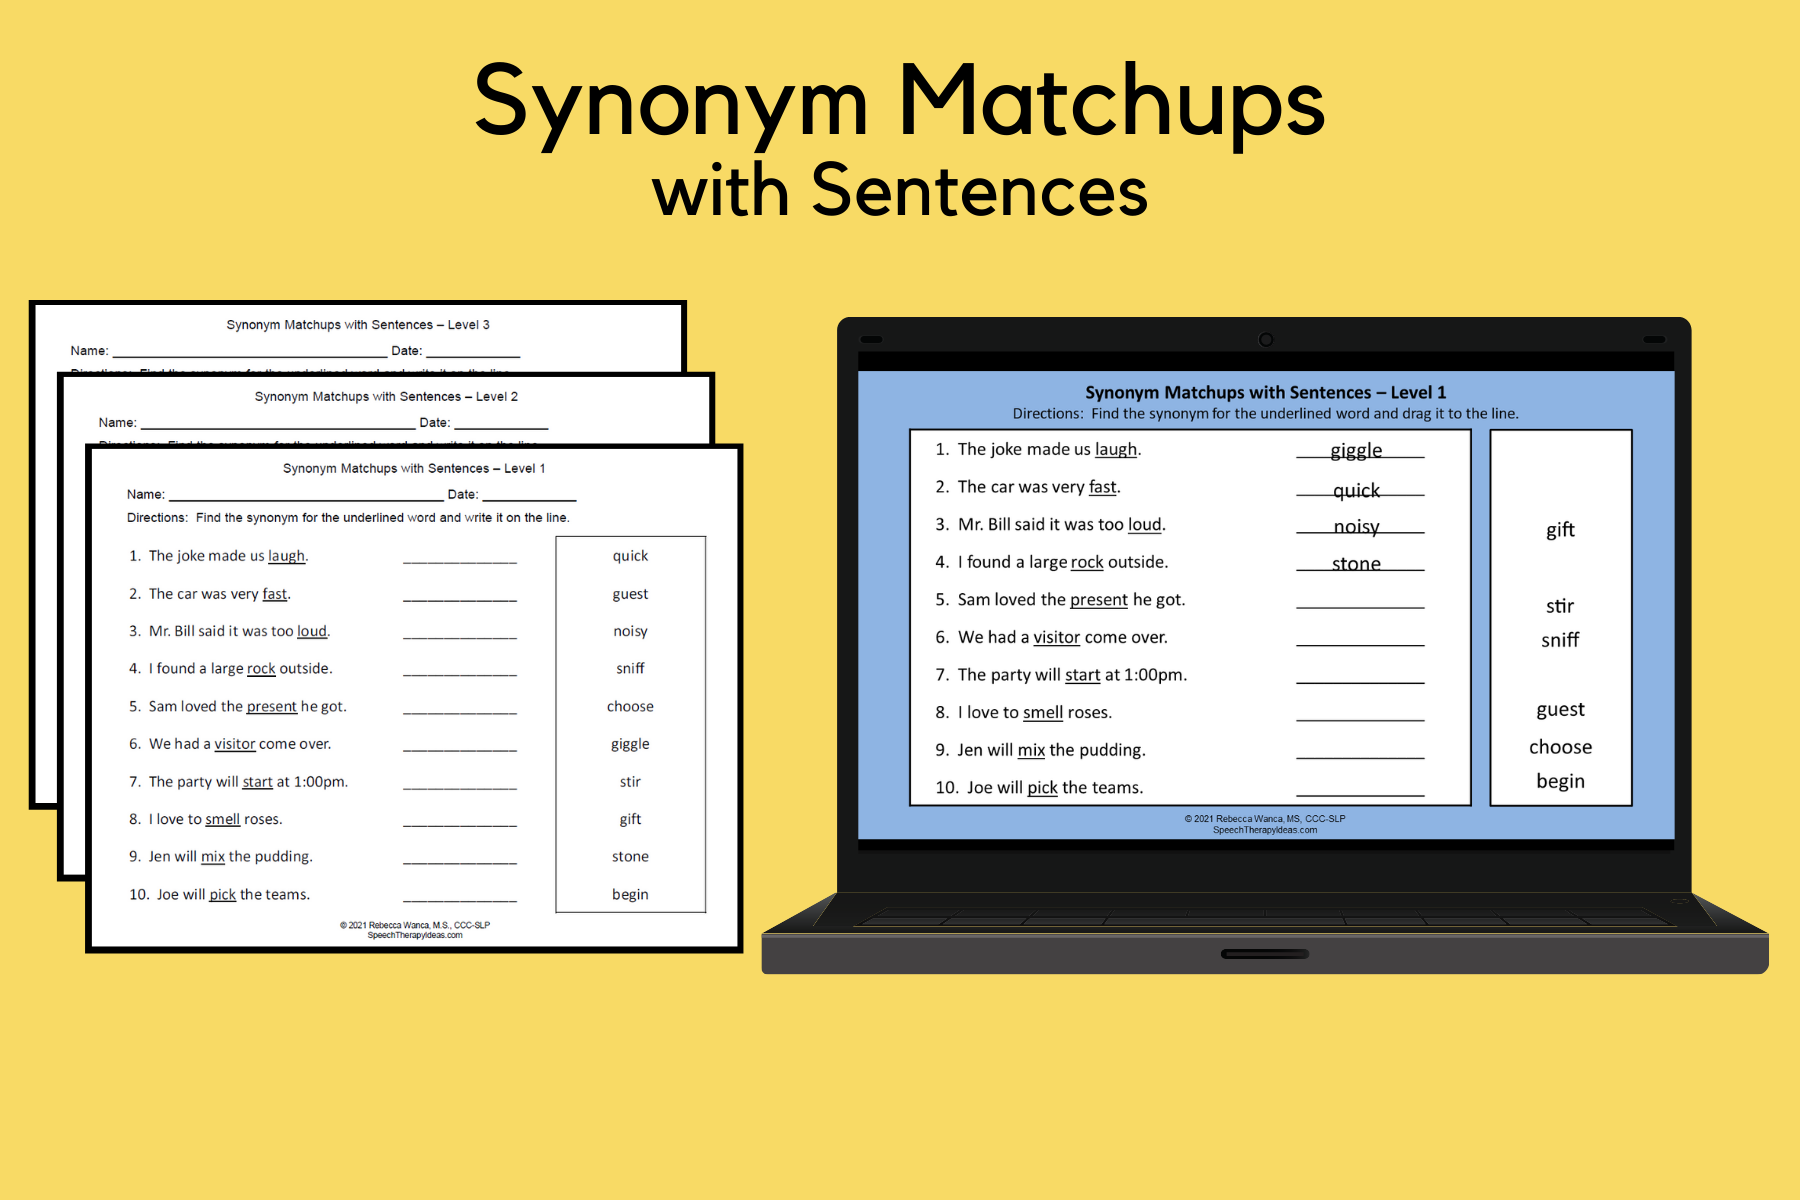 Synonym Matchups with Sentences